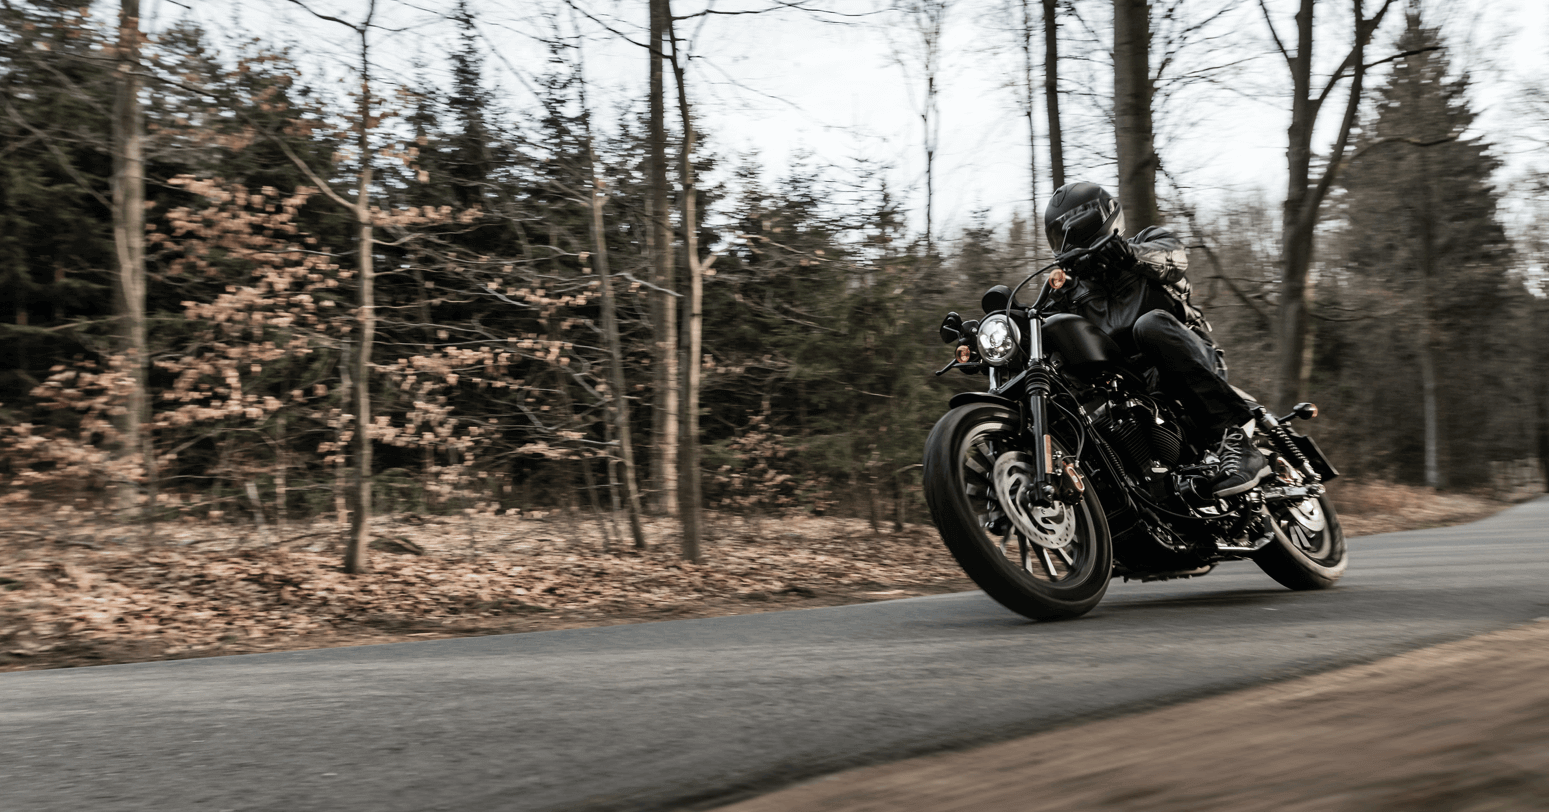 A motorcyclist in full black attire rides along a forest-lined road